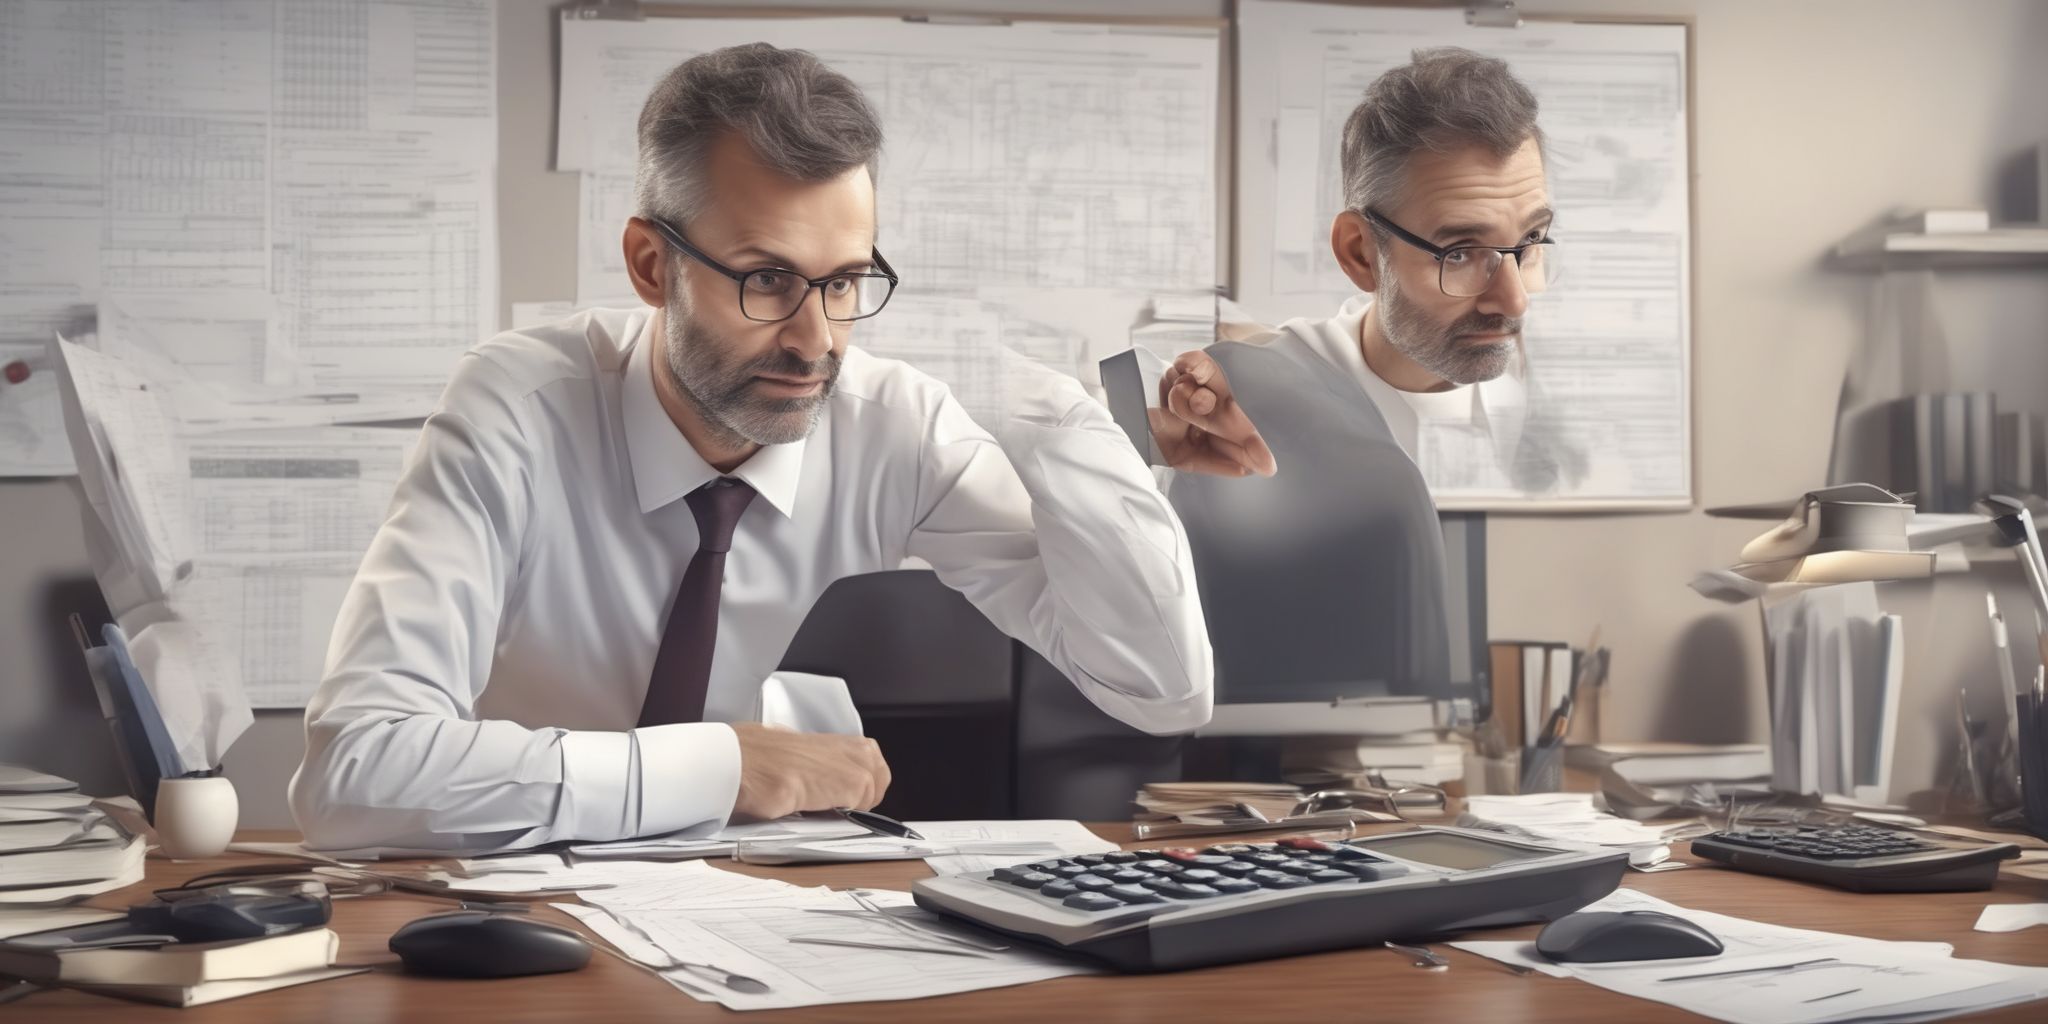 Accountant  in realistic, photographic style